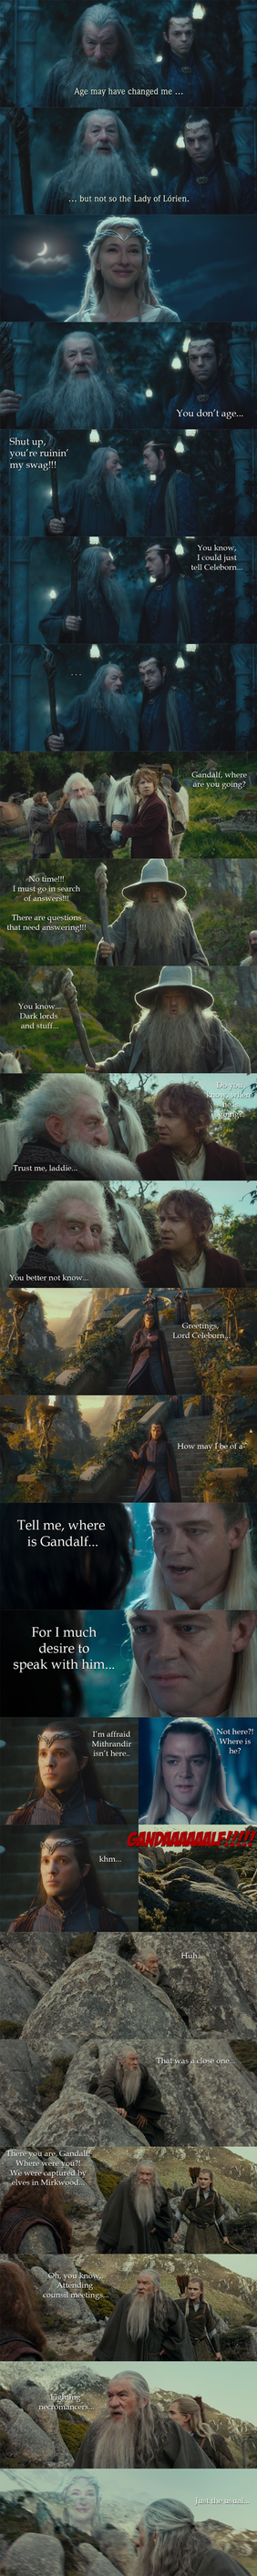 The Hobbit - The many adventures of Gandalf... by yourparodies